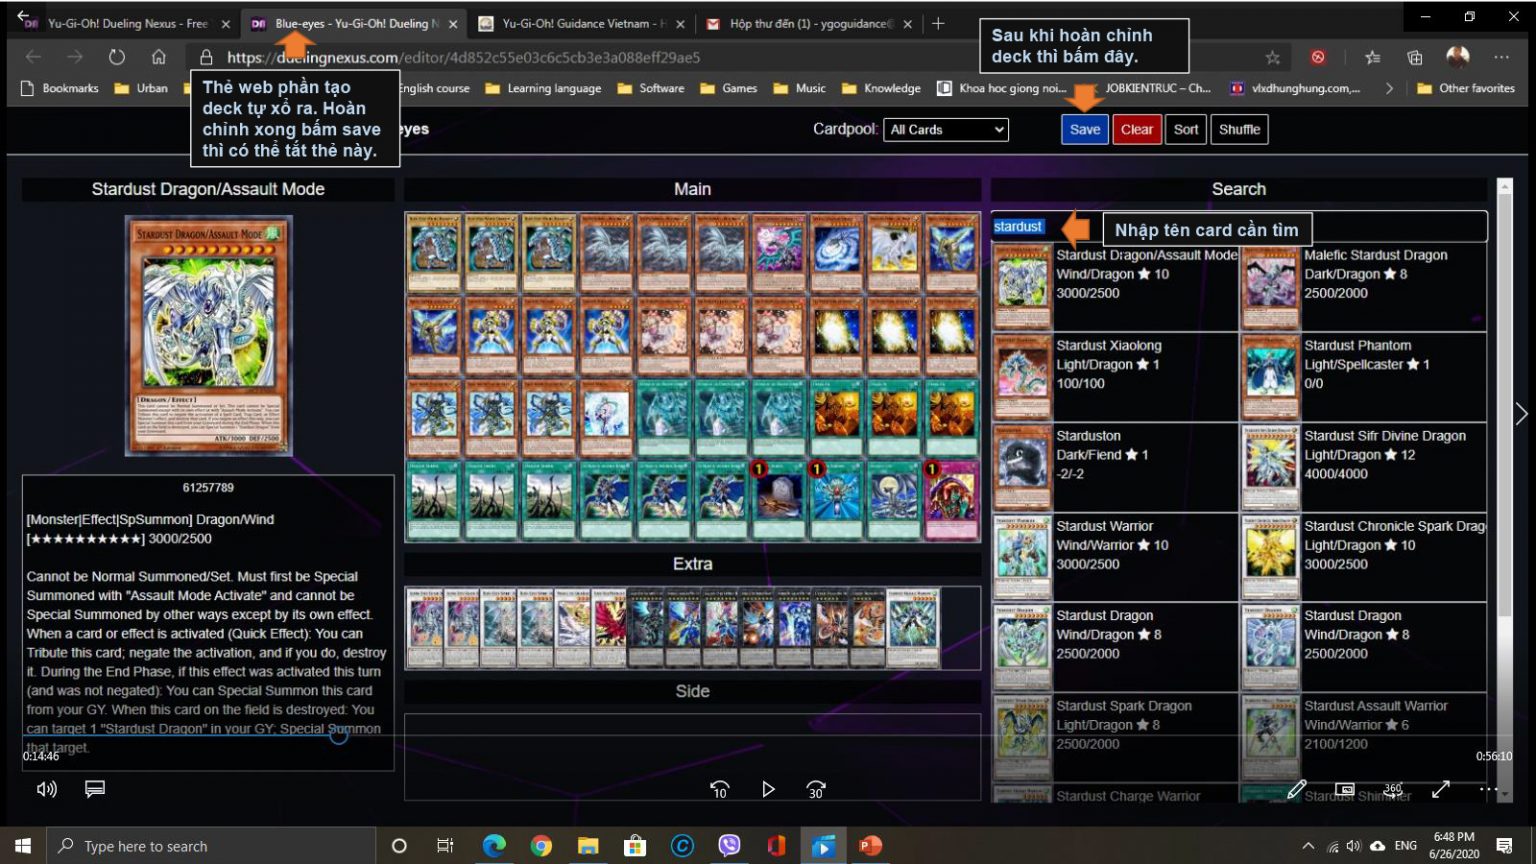 Manual deck creation interface, Create a new deck section